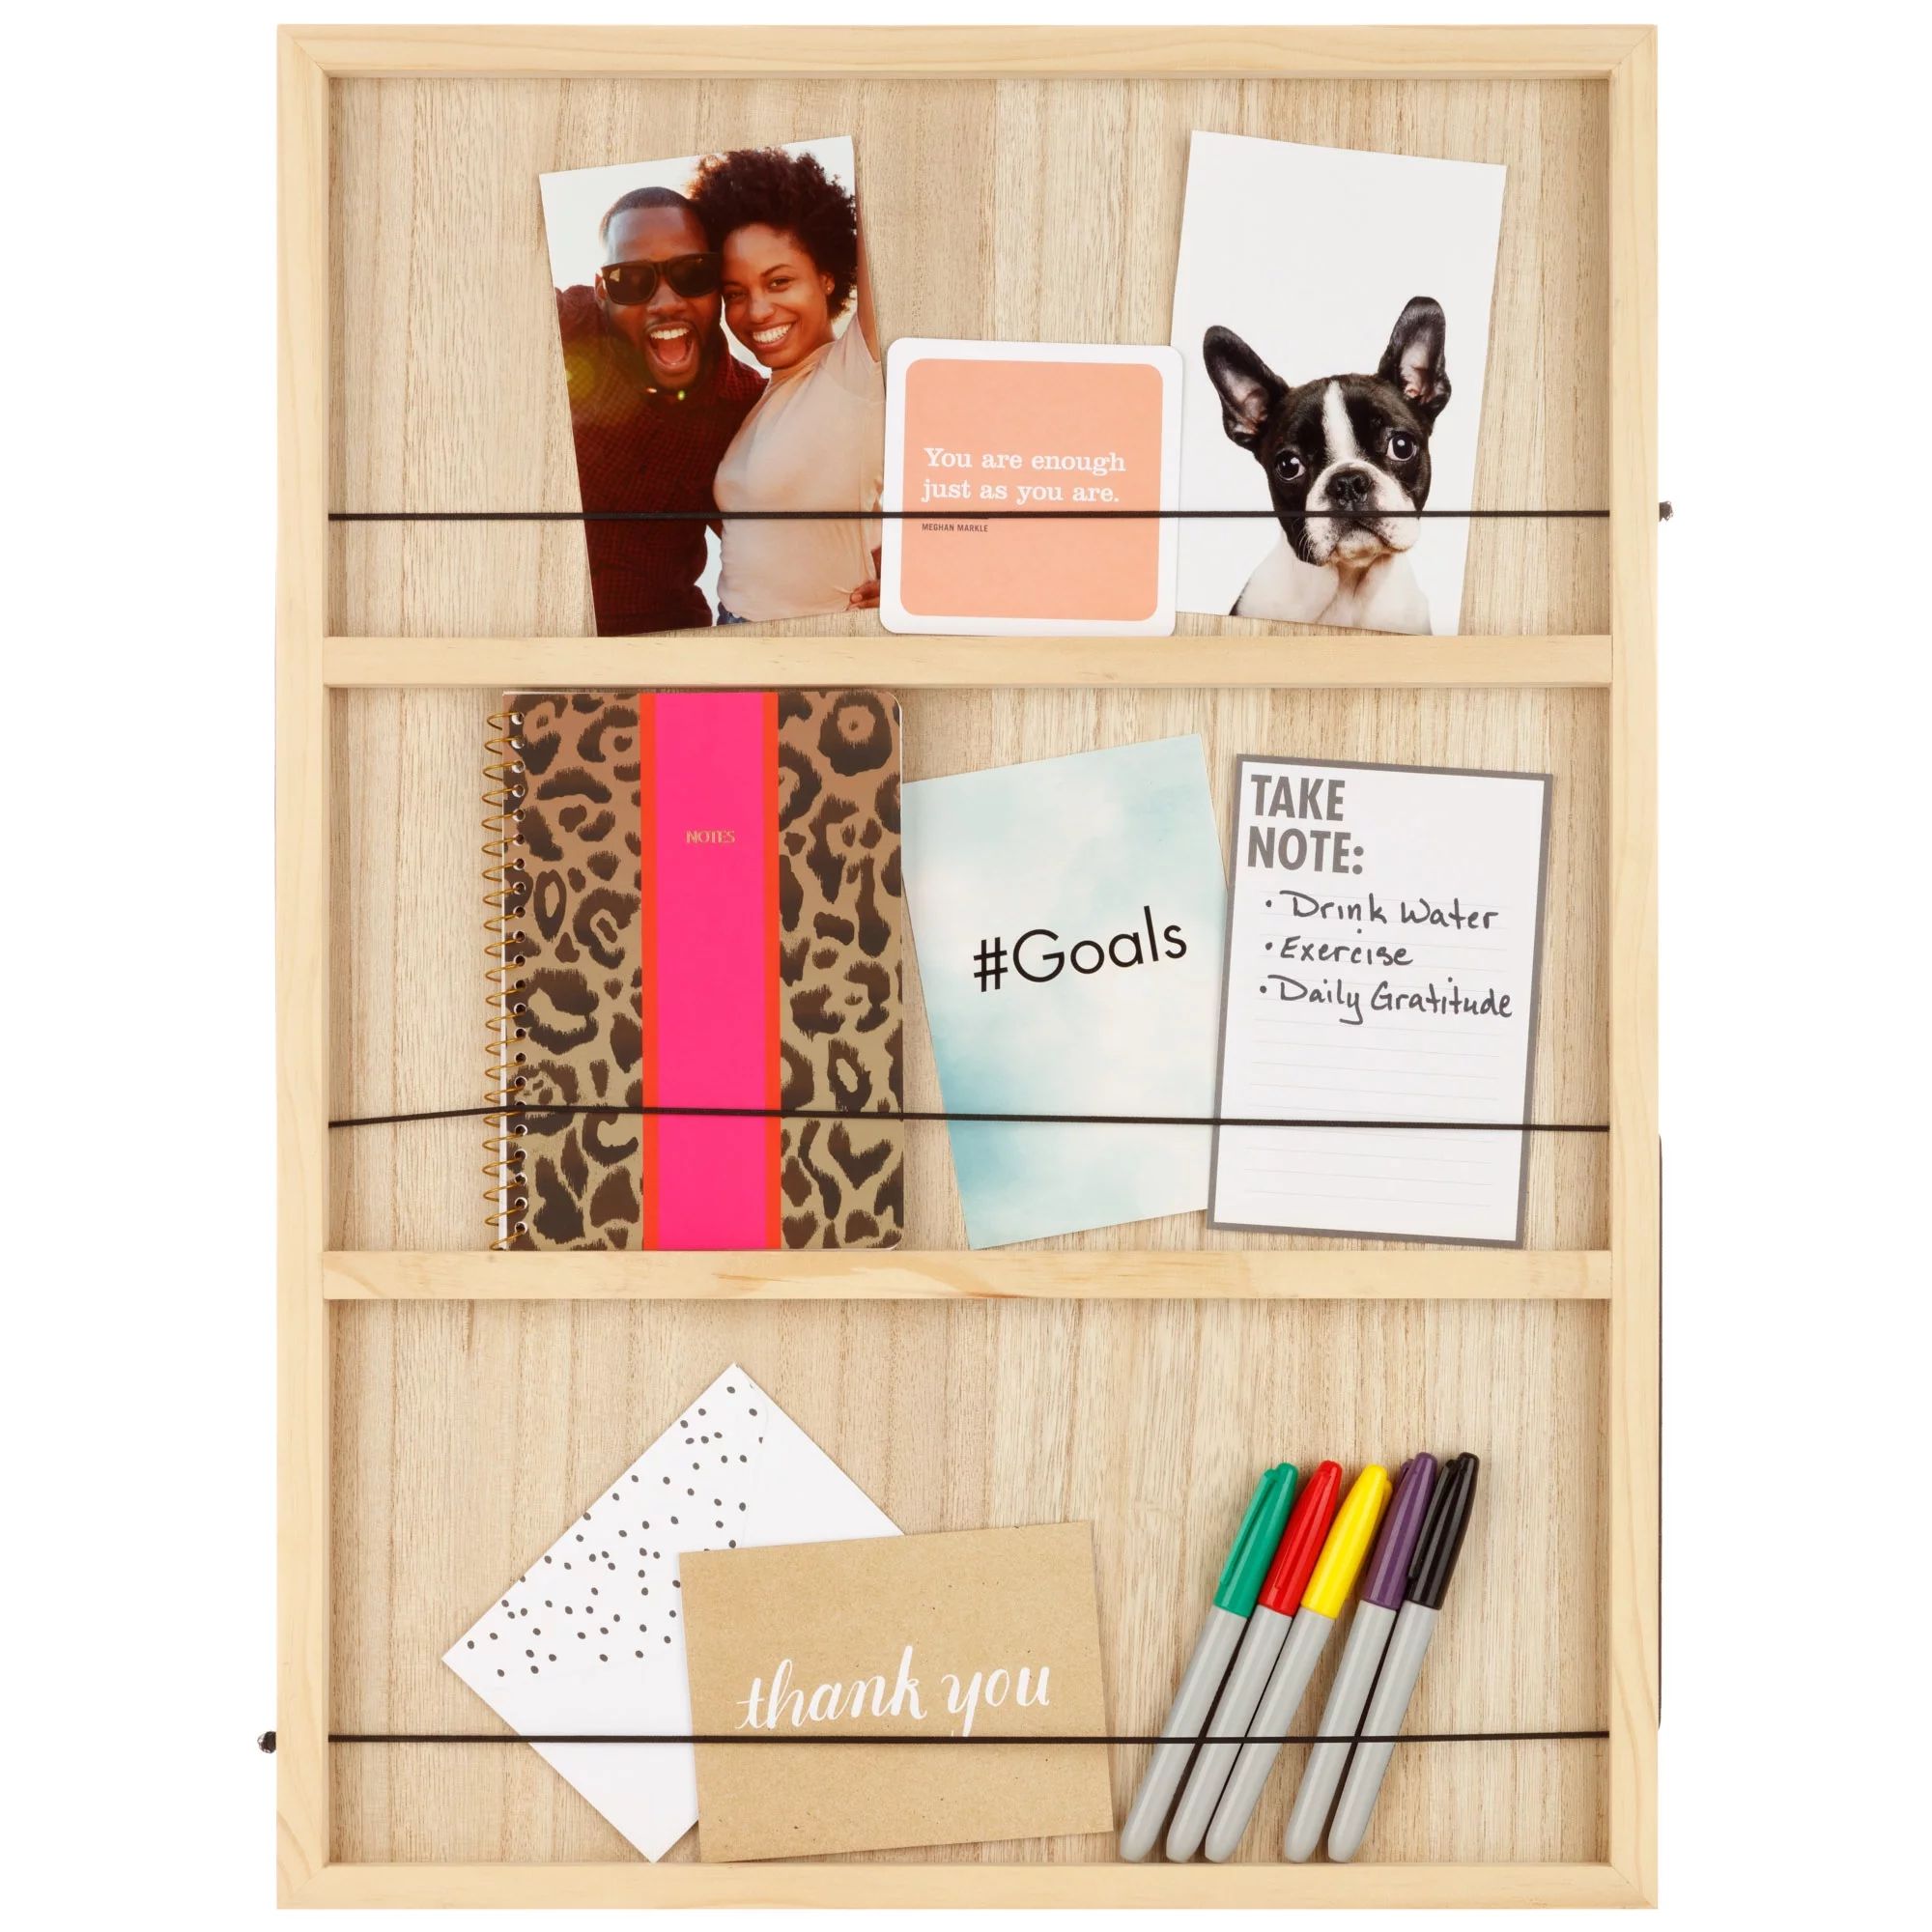 Gallery Solutions 18x24 Natural Wood Tiered Collage Memo Board Wall Organizer | Walmart (US)